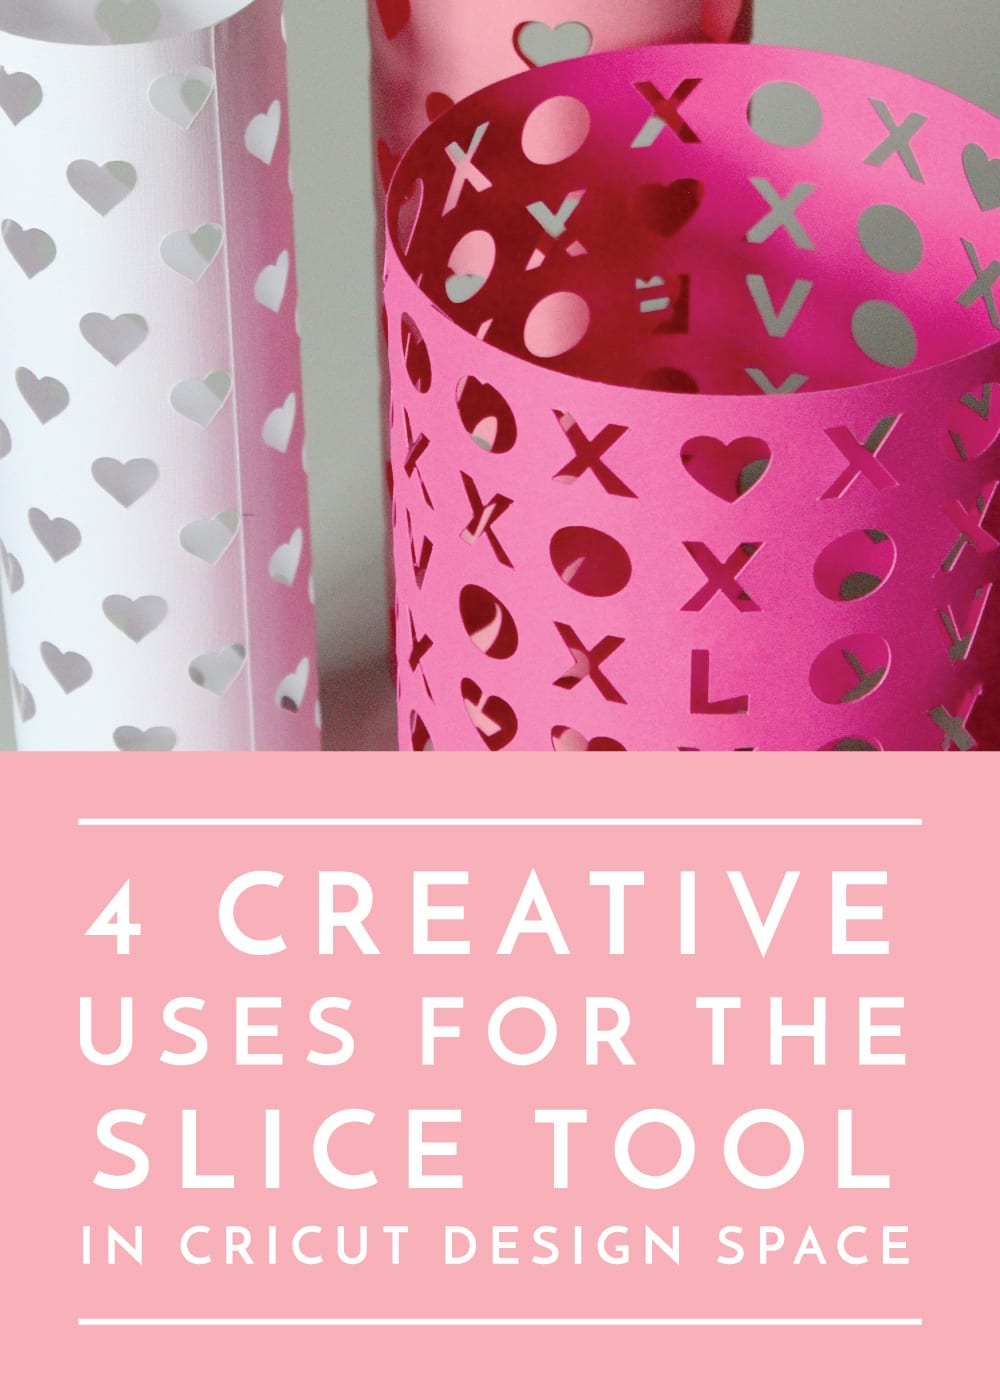 Slice is one of the most powerful tools in Cricut Design Space! Learn 4 effective and creative ways to use the Slice tool in this comprehensive tutorial!